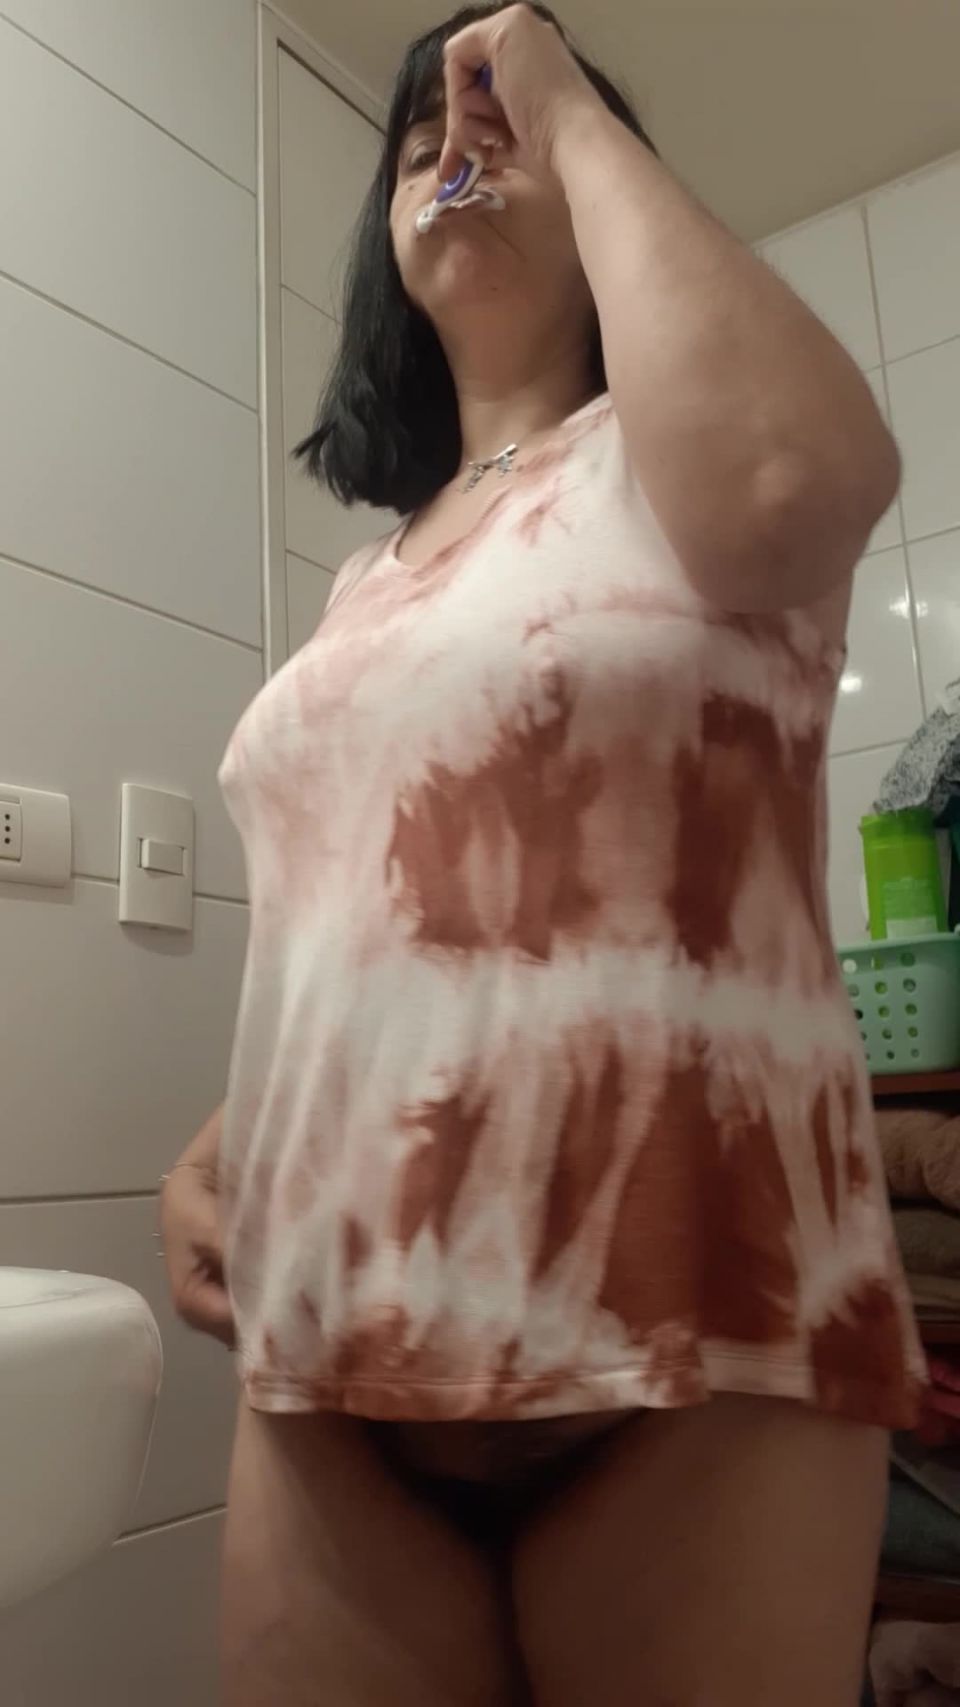 M@nyV1ds - The Hairy Pussy Mom - brushing my teeth with topless 2